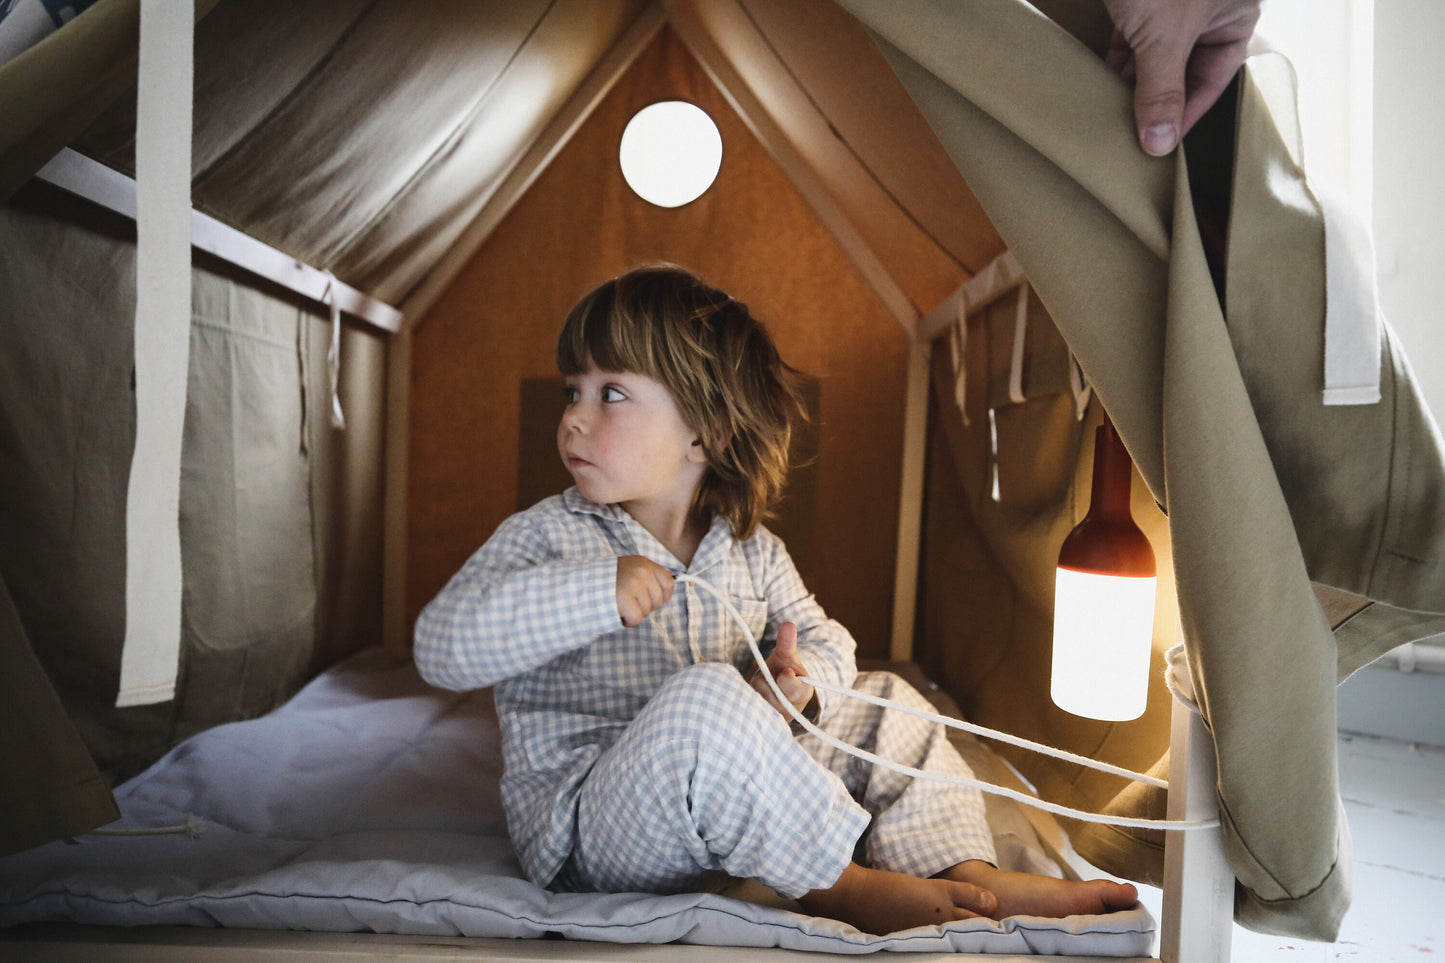 Play house for kids, teepee tent for kids